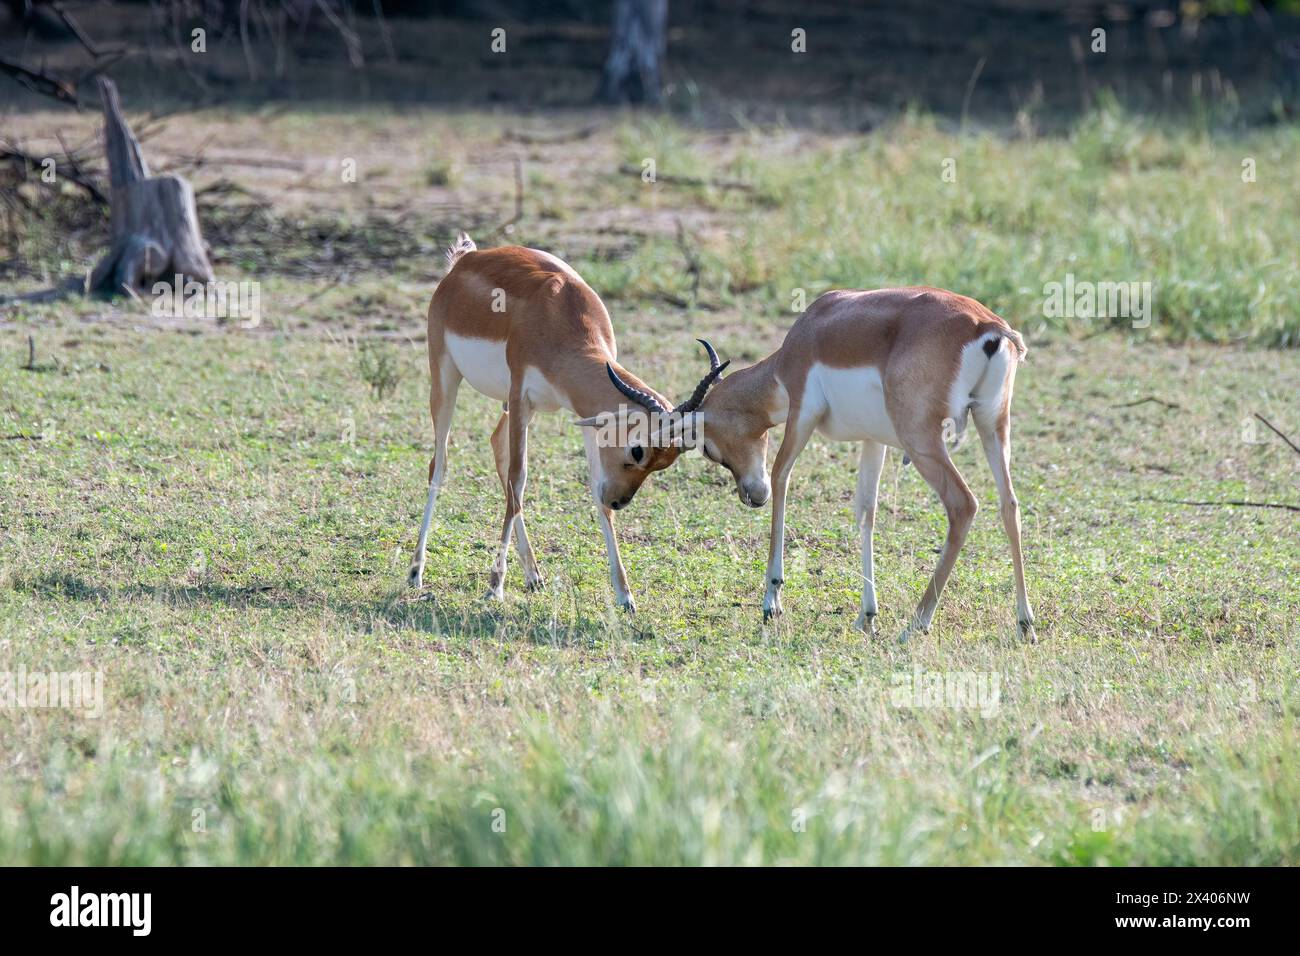 Two male Blackbucks fighting for dominance and mating previlages inside Blackbuck Sanctury in Tal Chappar, Rajasthan during a wildlife safari Stock Photo